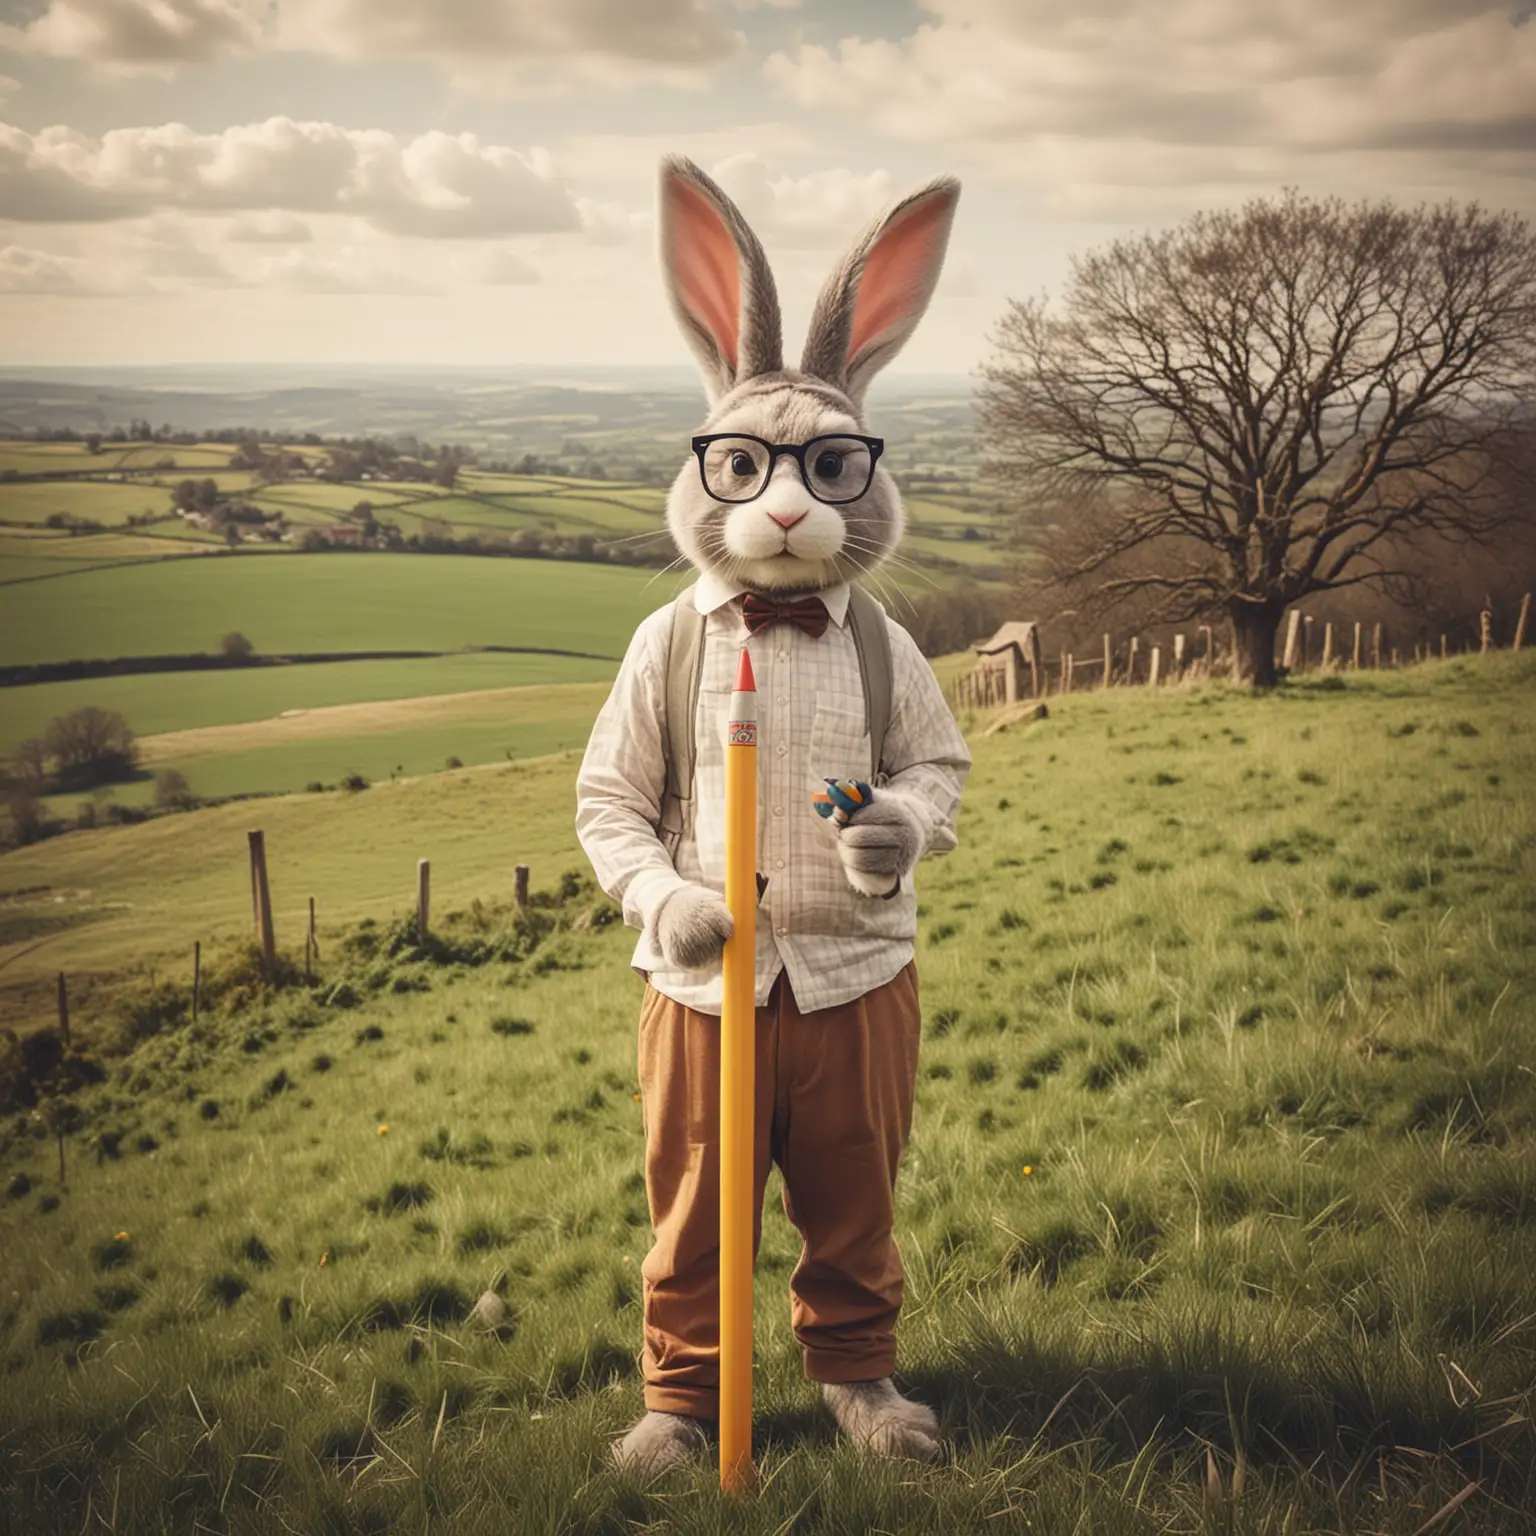 Hipster Easter Bunny Sketching with Giant Pencil in the English Countryside